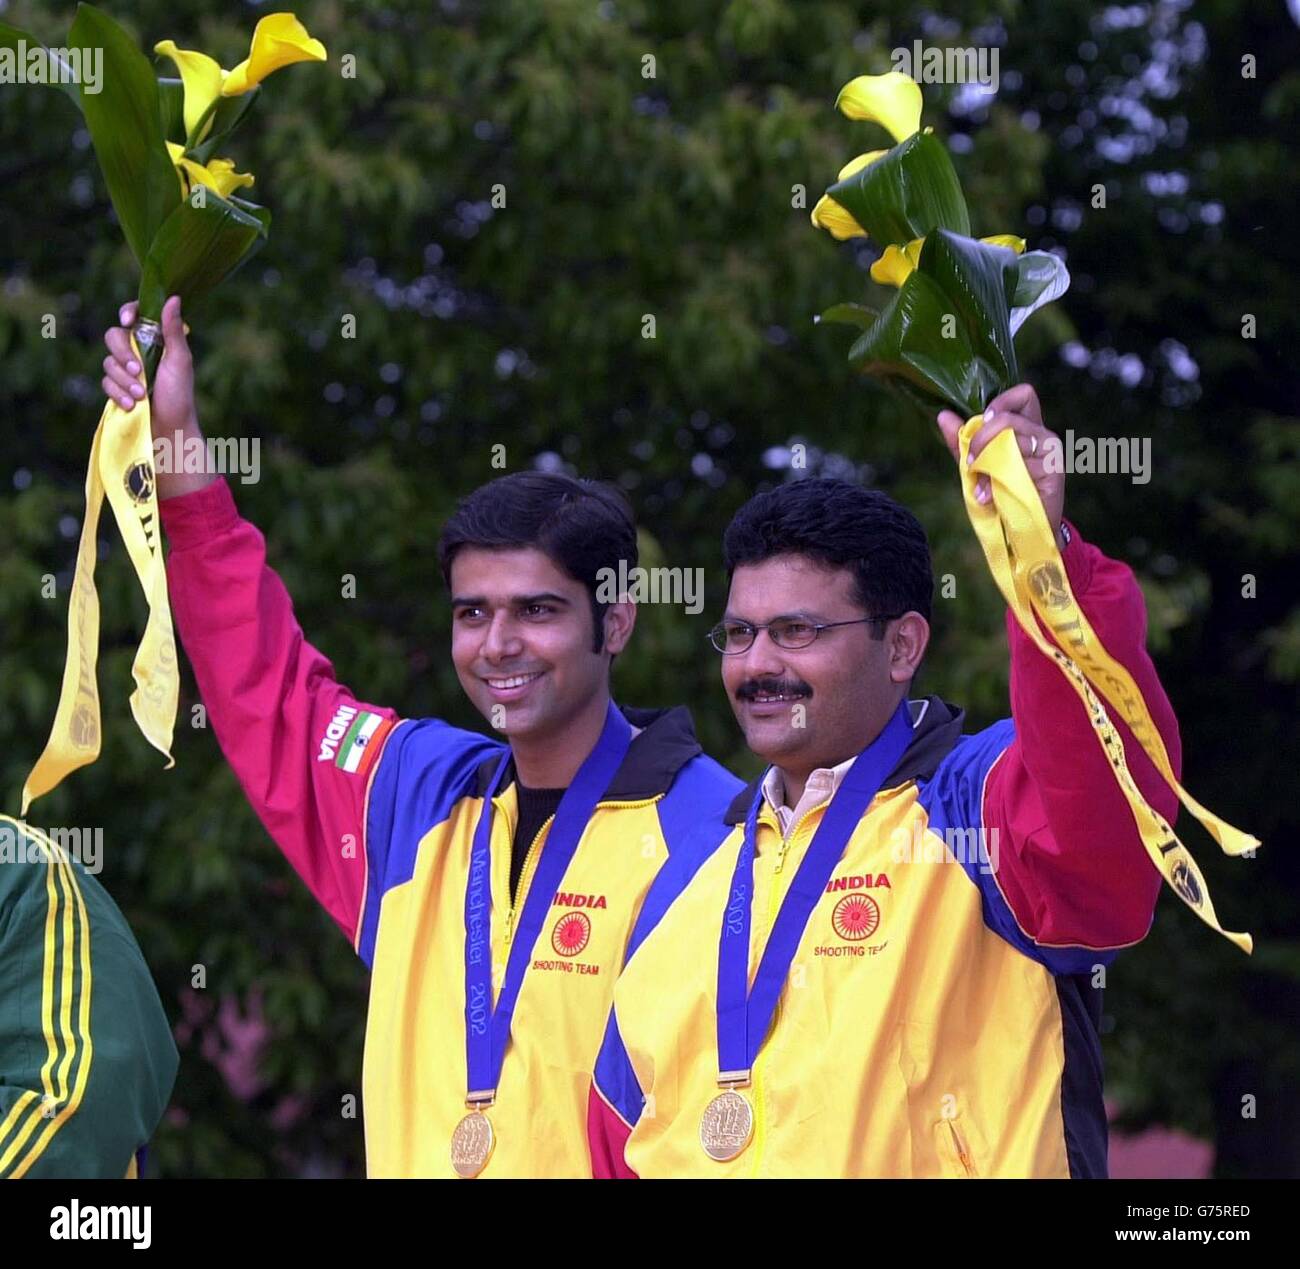 India's Vivek Singh (left) and Samaresh Jung celebrate gold in the Men's 50 metre Pistol Pairs. The pair posed during the medal ceremony after the shooting competition at the National Shooting Centre, Bisley. Stock Photo